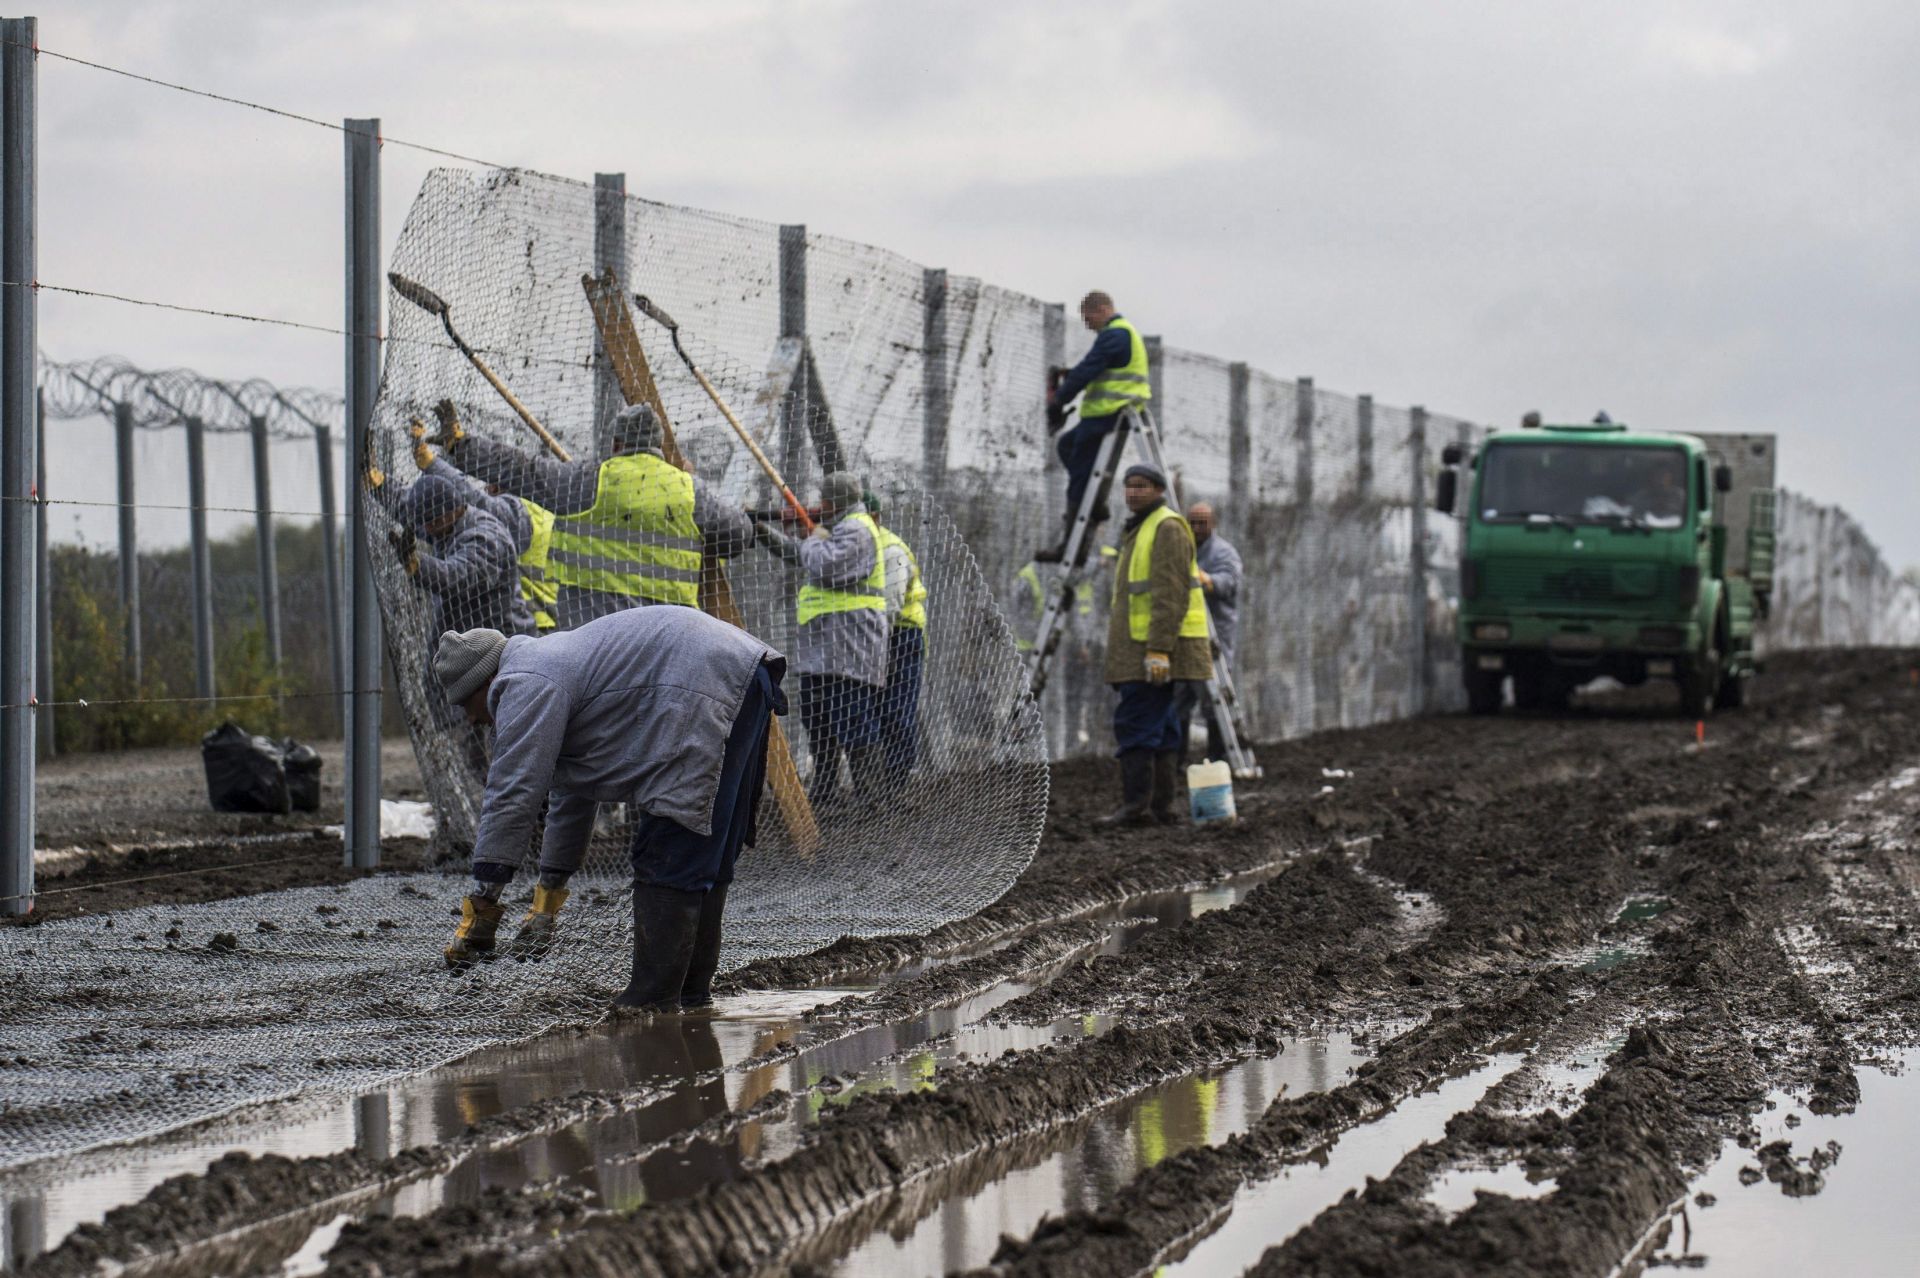 epa05606793 Hungarian convicts install an experimental section of the second line of the border fence at the Hungarian-Serbian border near the village of Gara, 213 kms south of Budapest, Hungary 28 October 2016. The 10.3 kilometer long section is constructed between Gara and Bacsszentgyorgy to reinforce the primary fence that prevents illegal migrants using the Balkan route from entering Hungary.  EPA/SANDOR UJVARI HUNGARY OUT